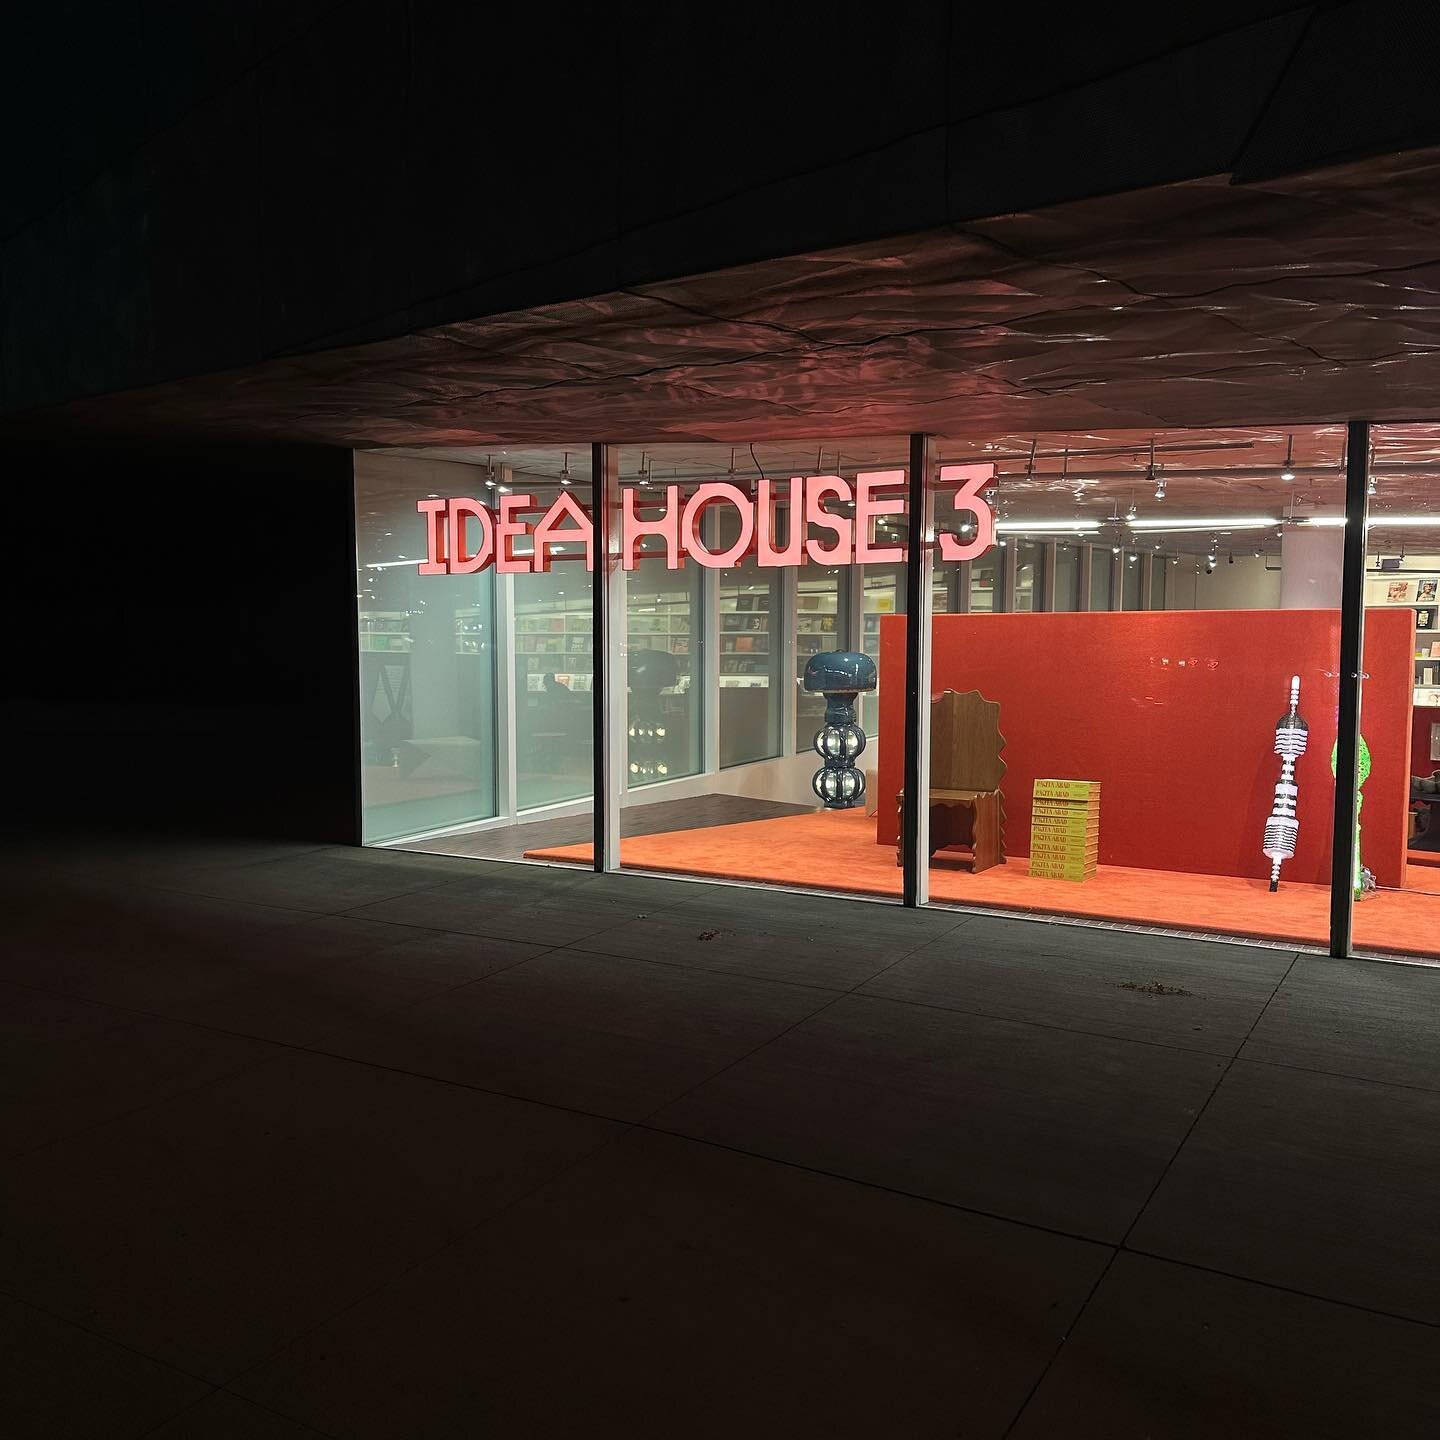 I&rsquo;m so happy that I got to be a part of @ideahousethree at @walkerartcenter alongside so many talented designers. Big thank you to @anavaprojects @officiallyfelice and @aslininayni for including me.